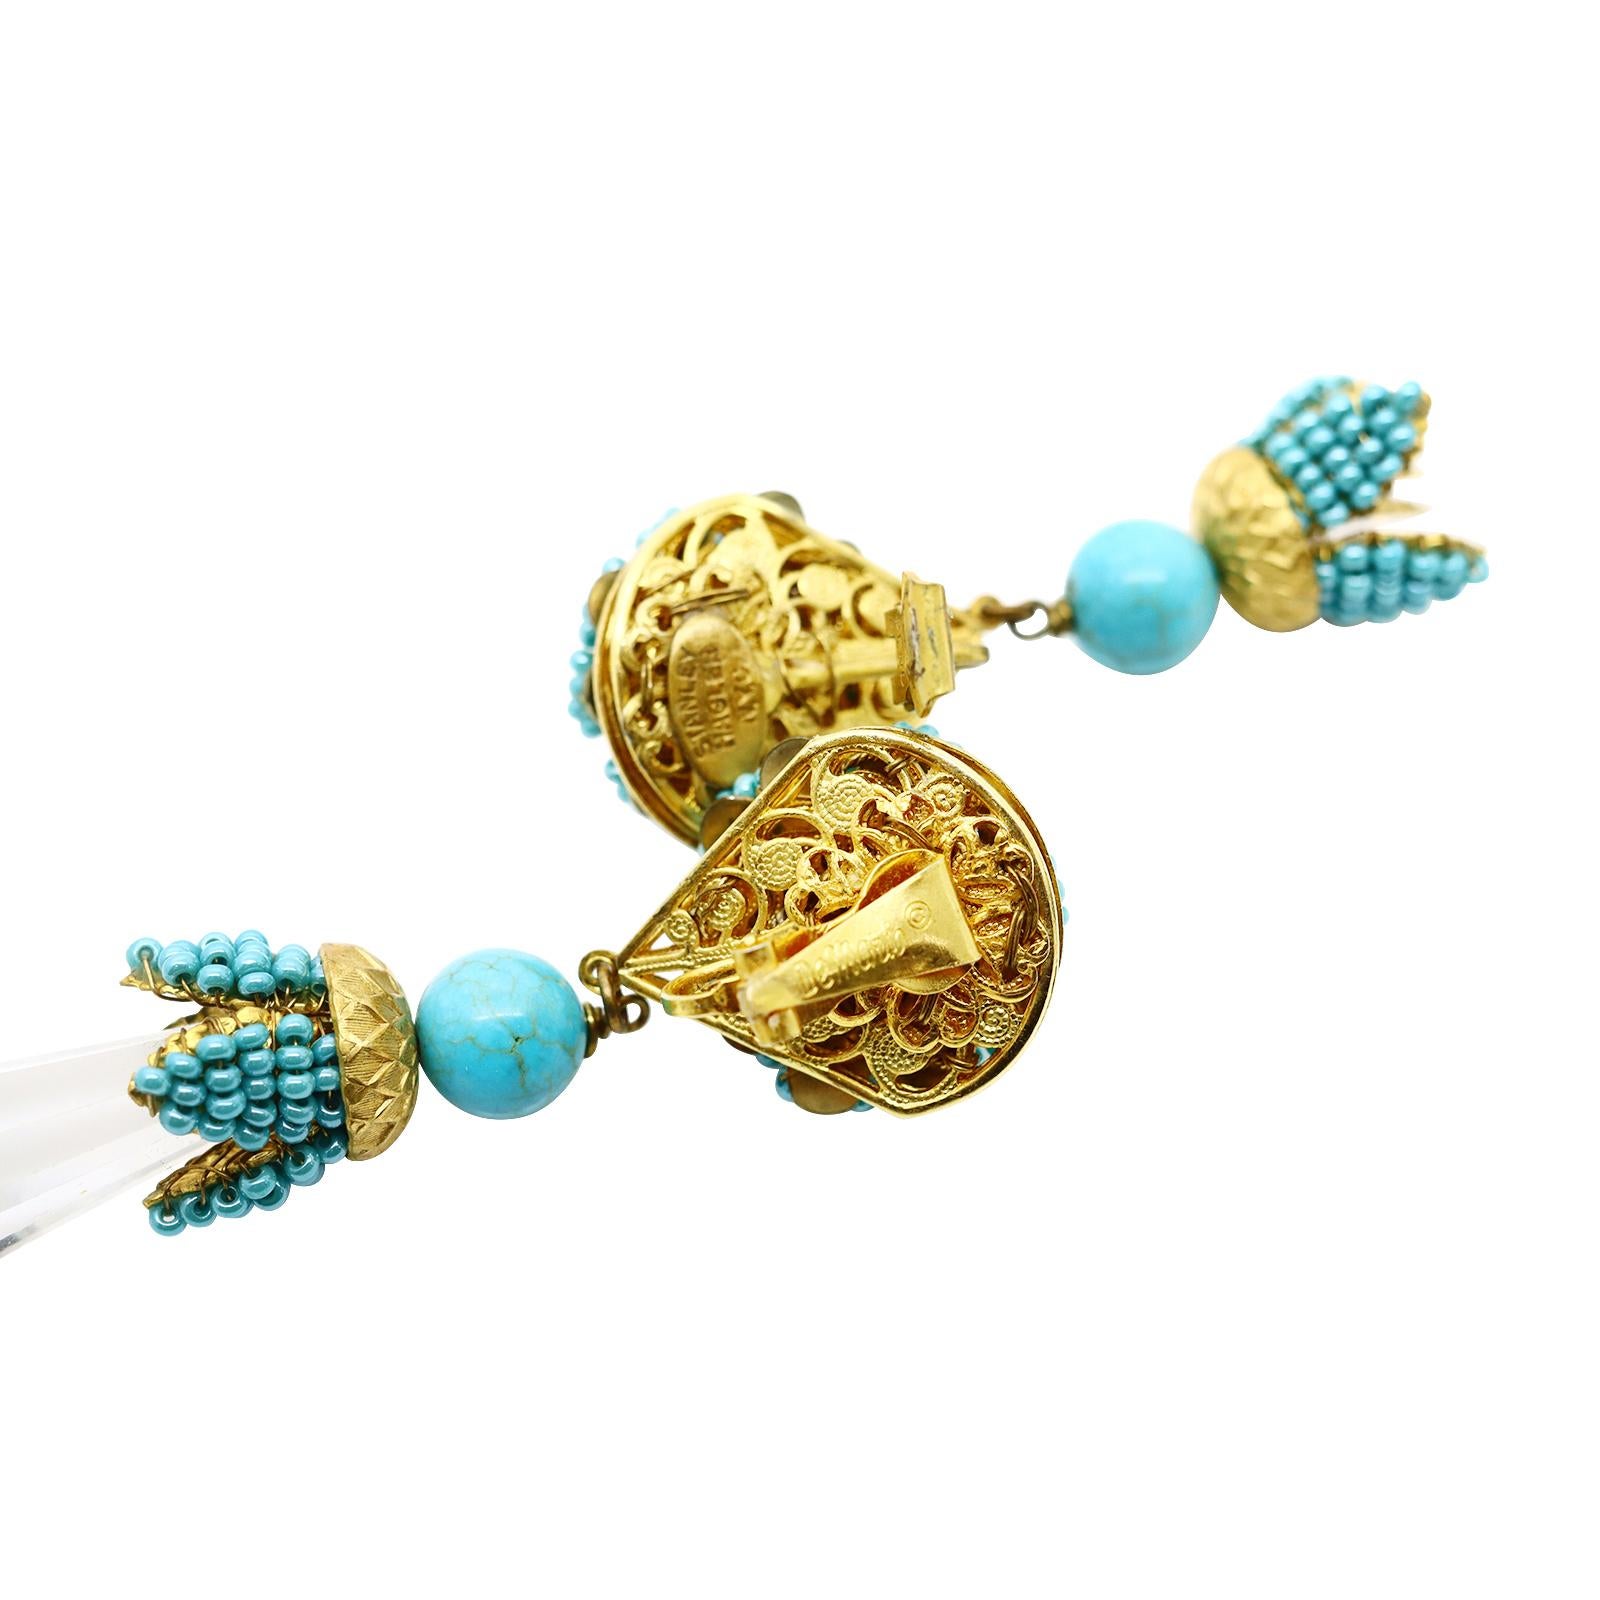 Vintage Stanley Hagler Faux Turquoise Dangling Crystal Earrings Circa 1960s For Sale 3